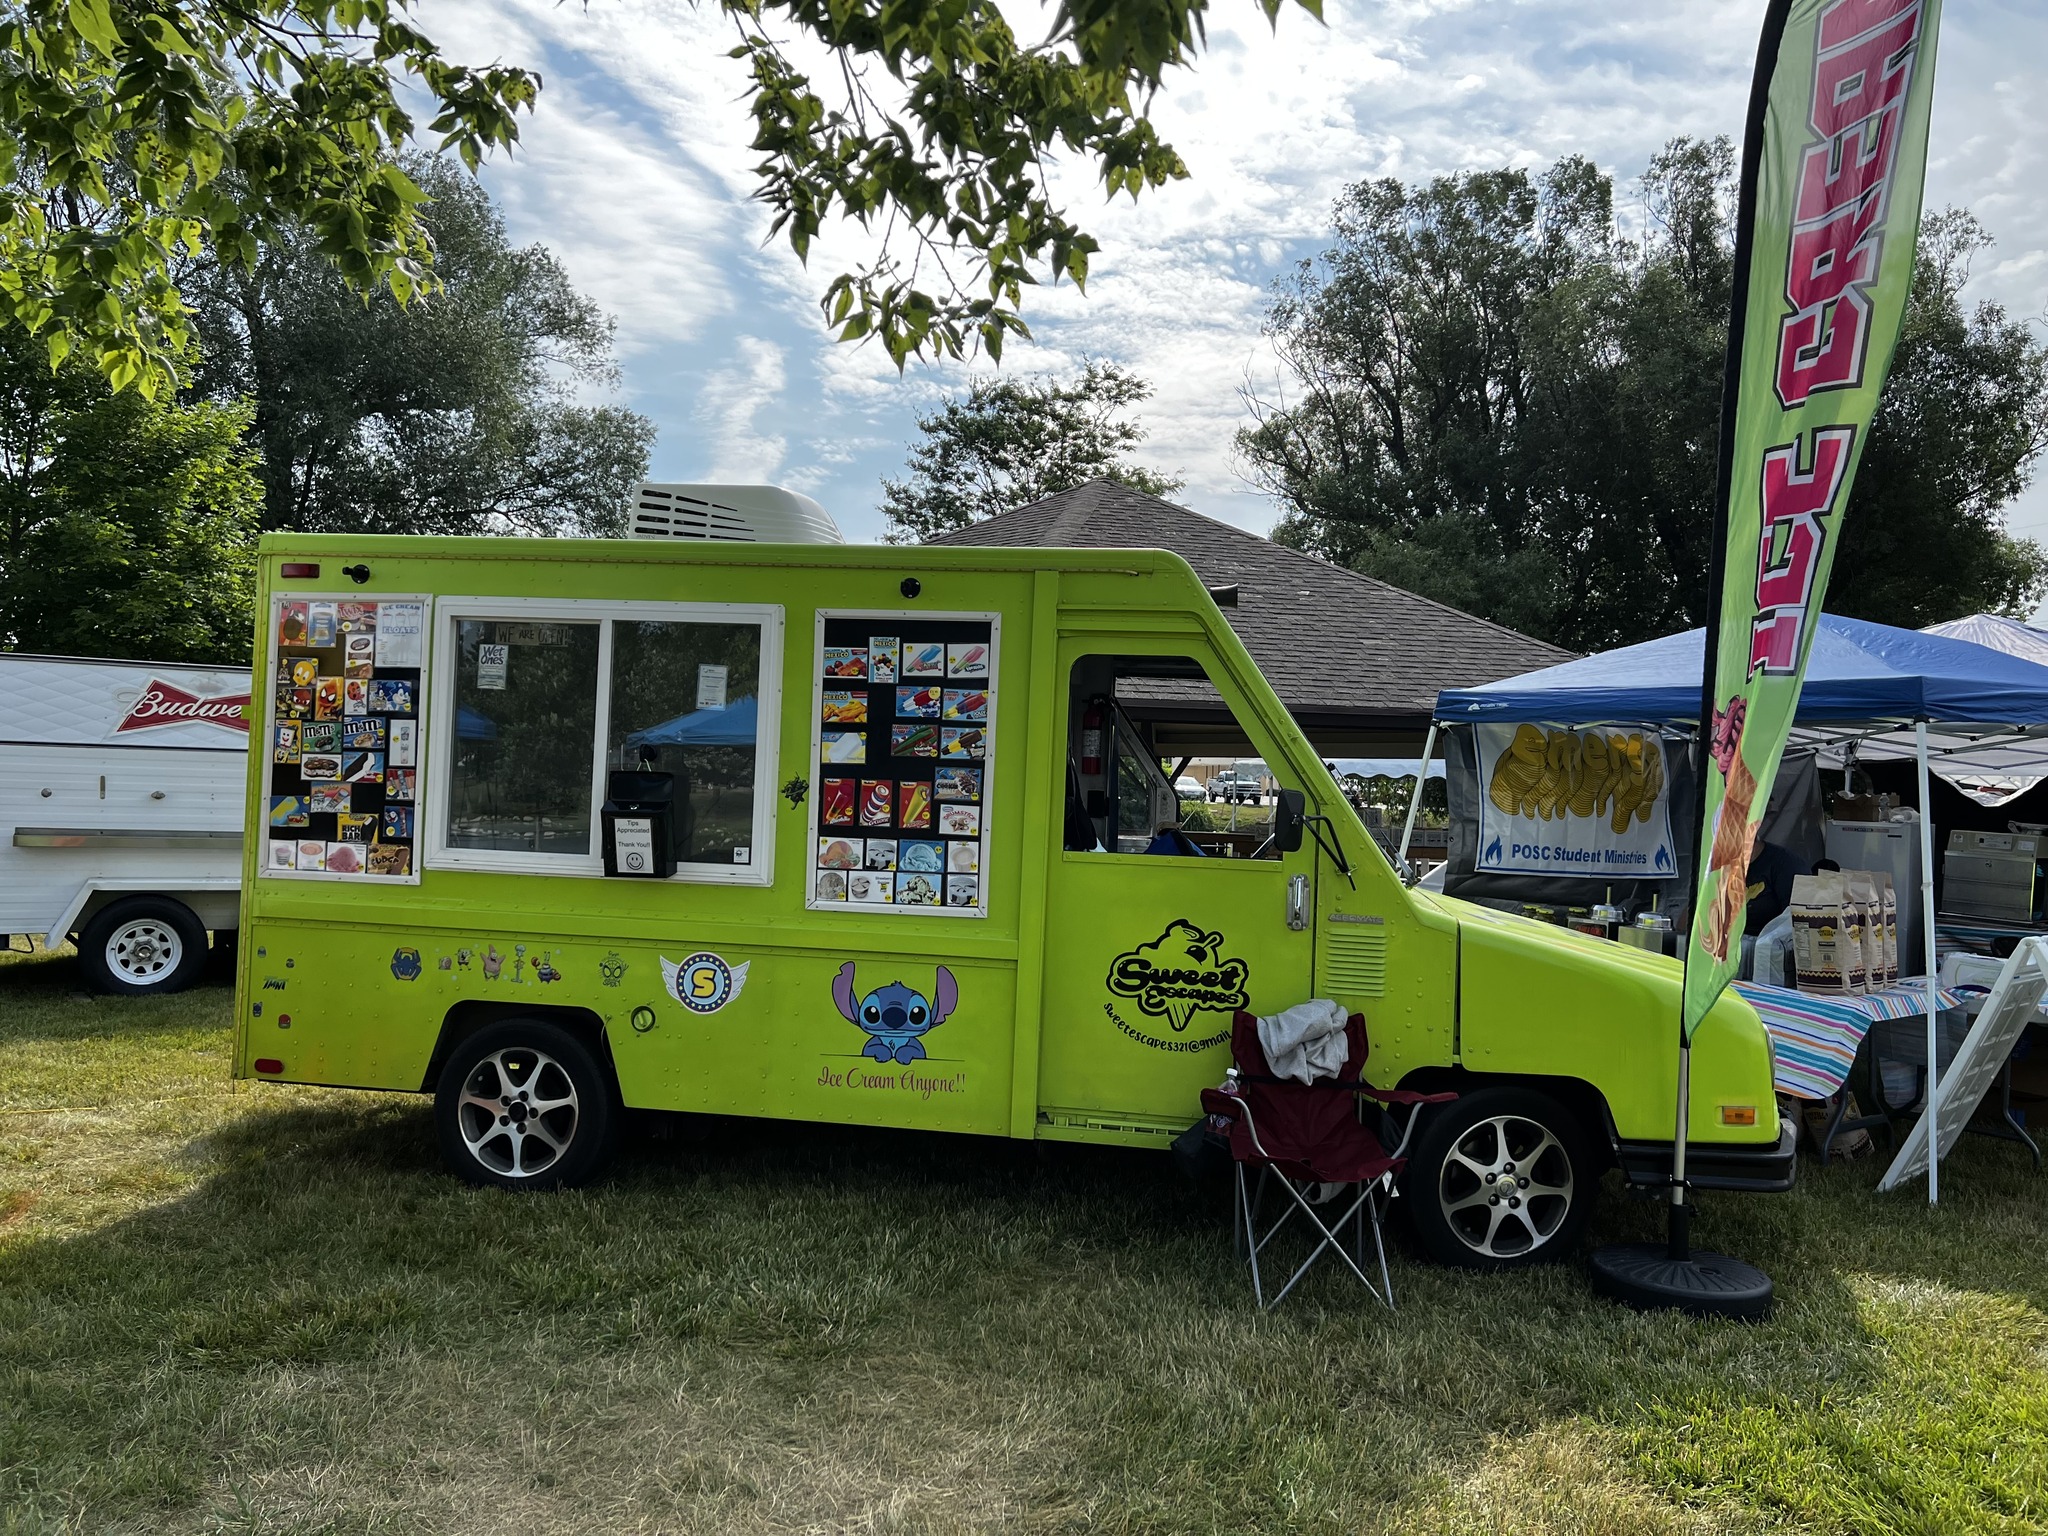 Big ice cream truck at an event